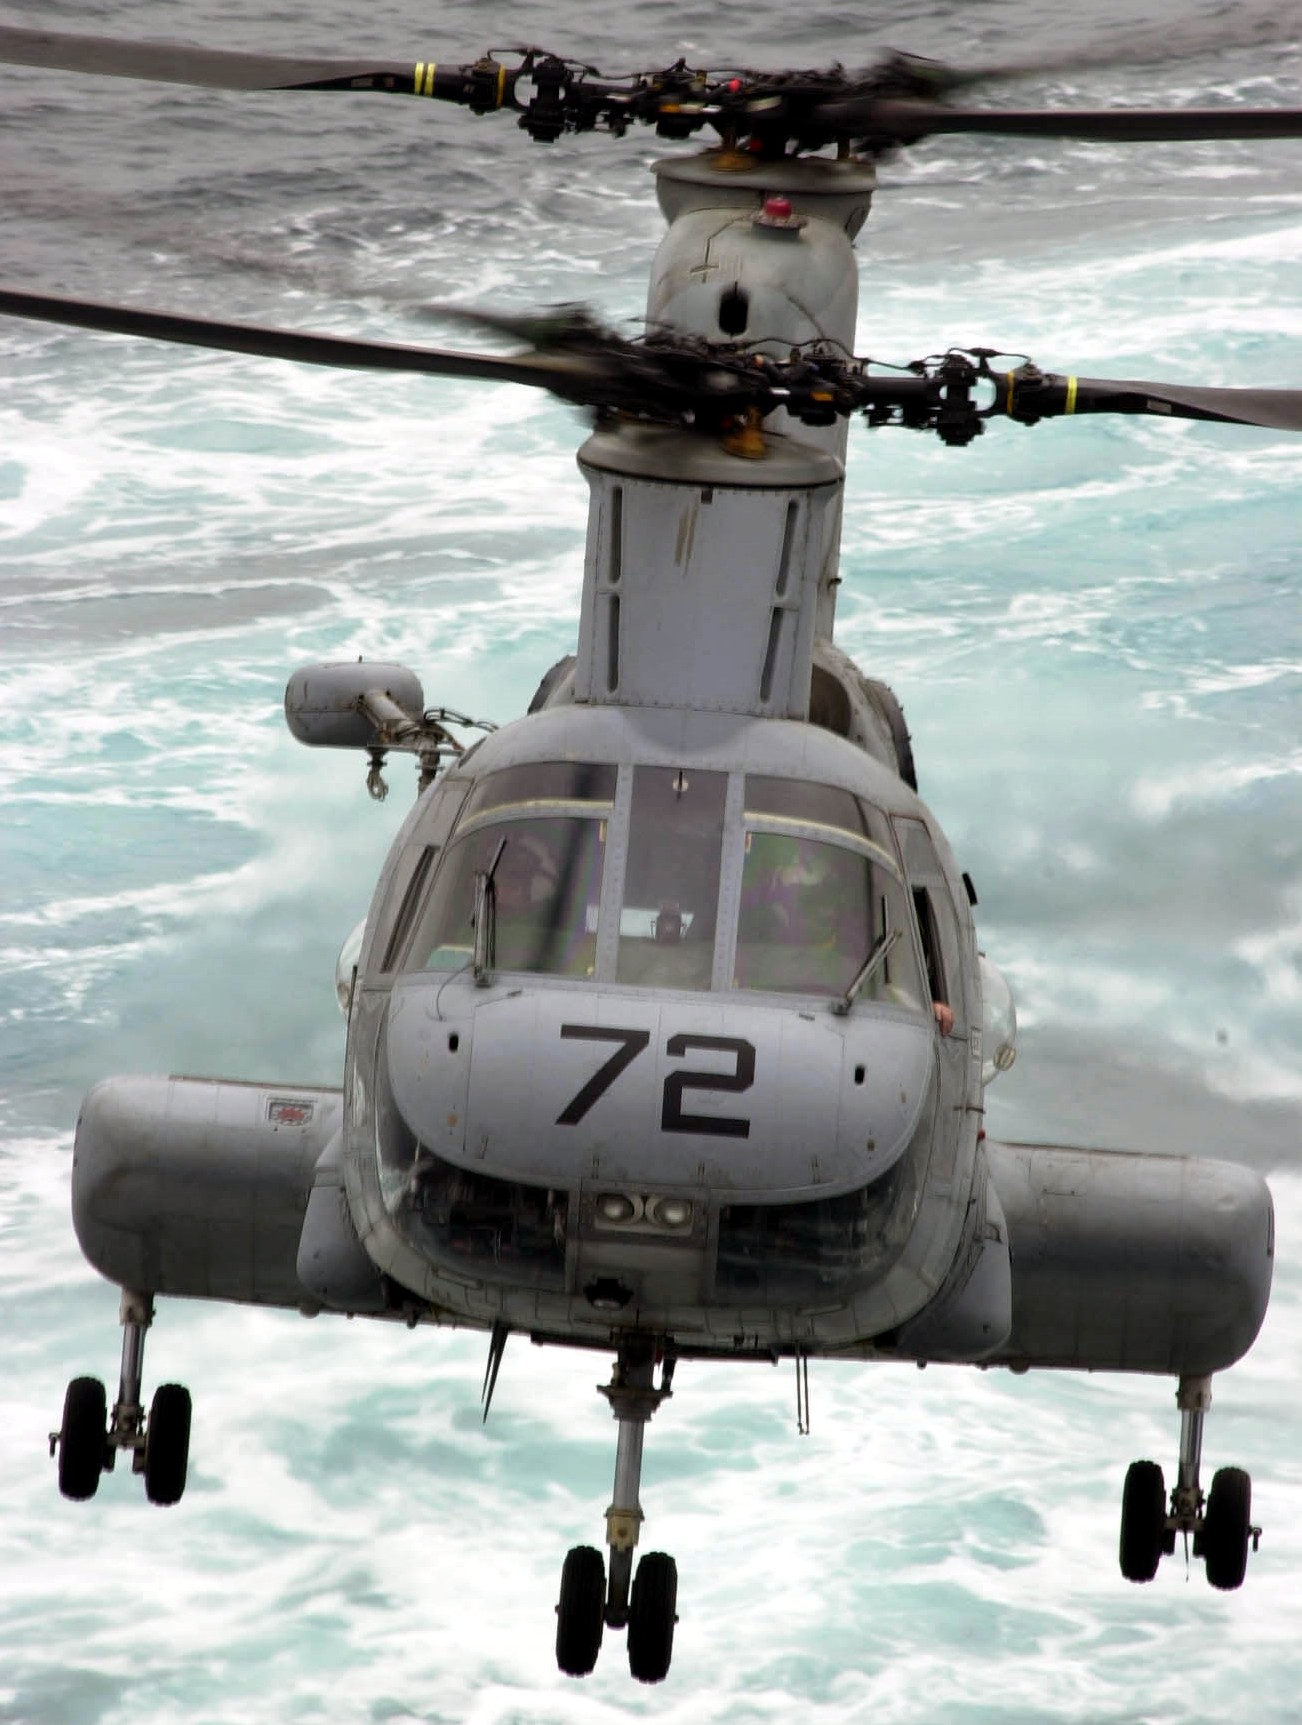 hc-11 gunbearers helicopter combat support squadron navy ch-46 sea knight 48